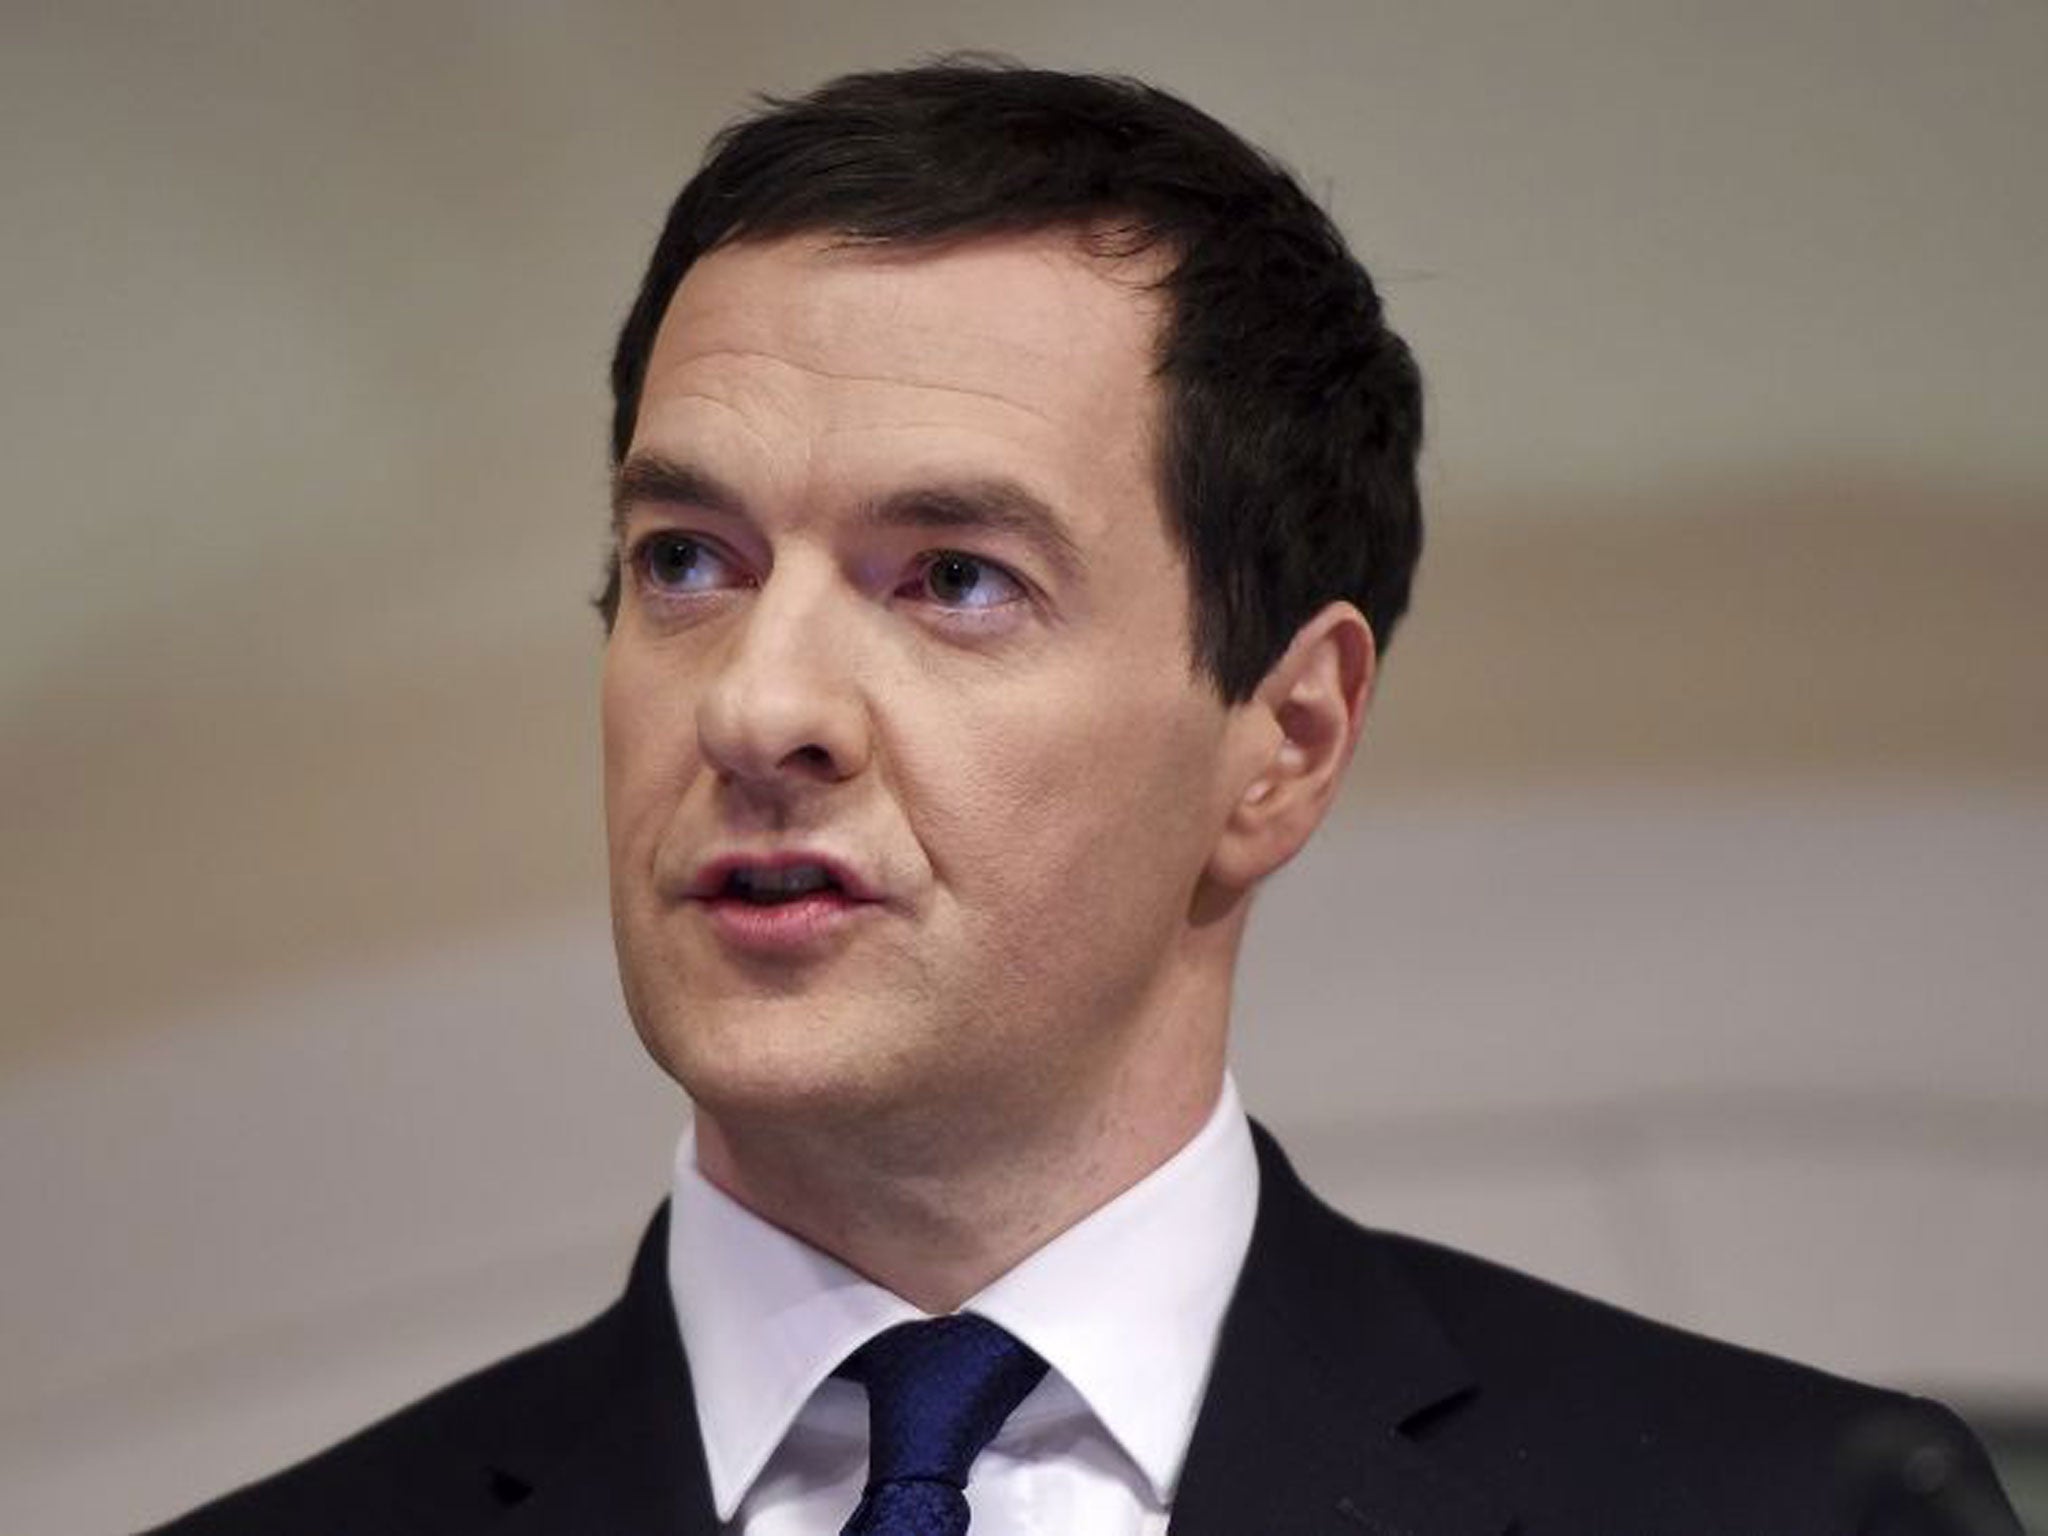 Chancellor George Osborne will announce the budget on March 18 at 12.30